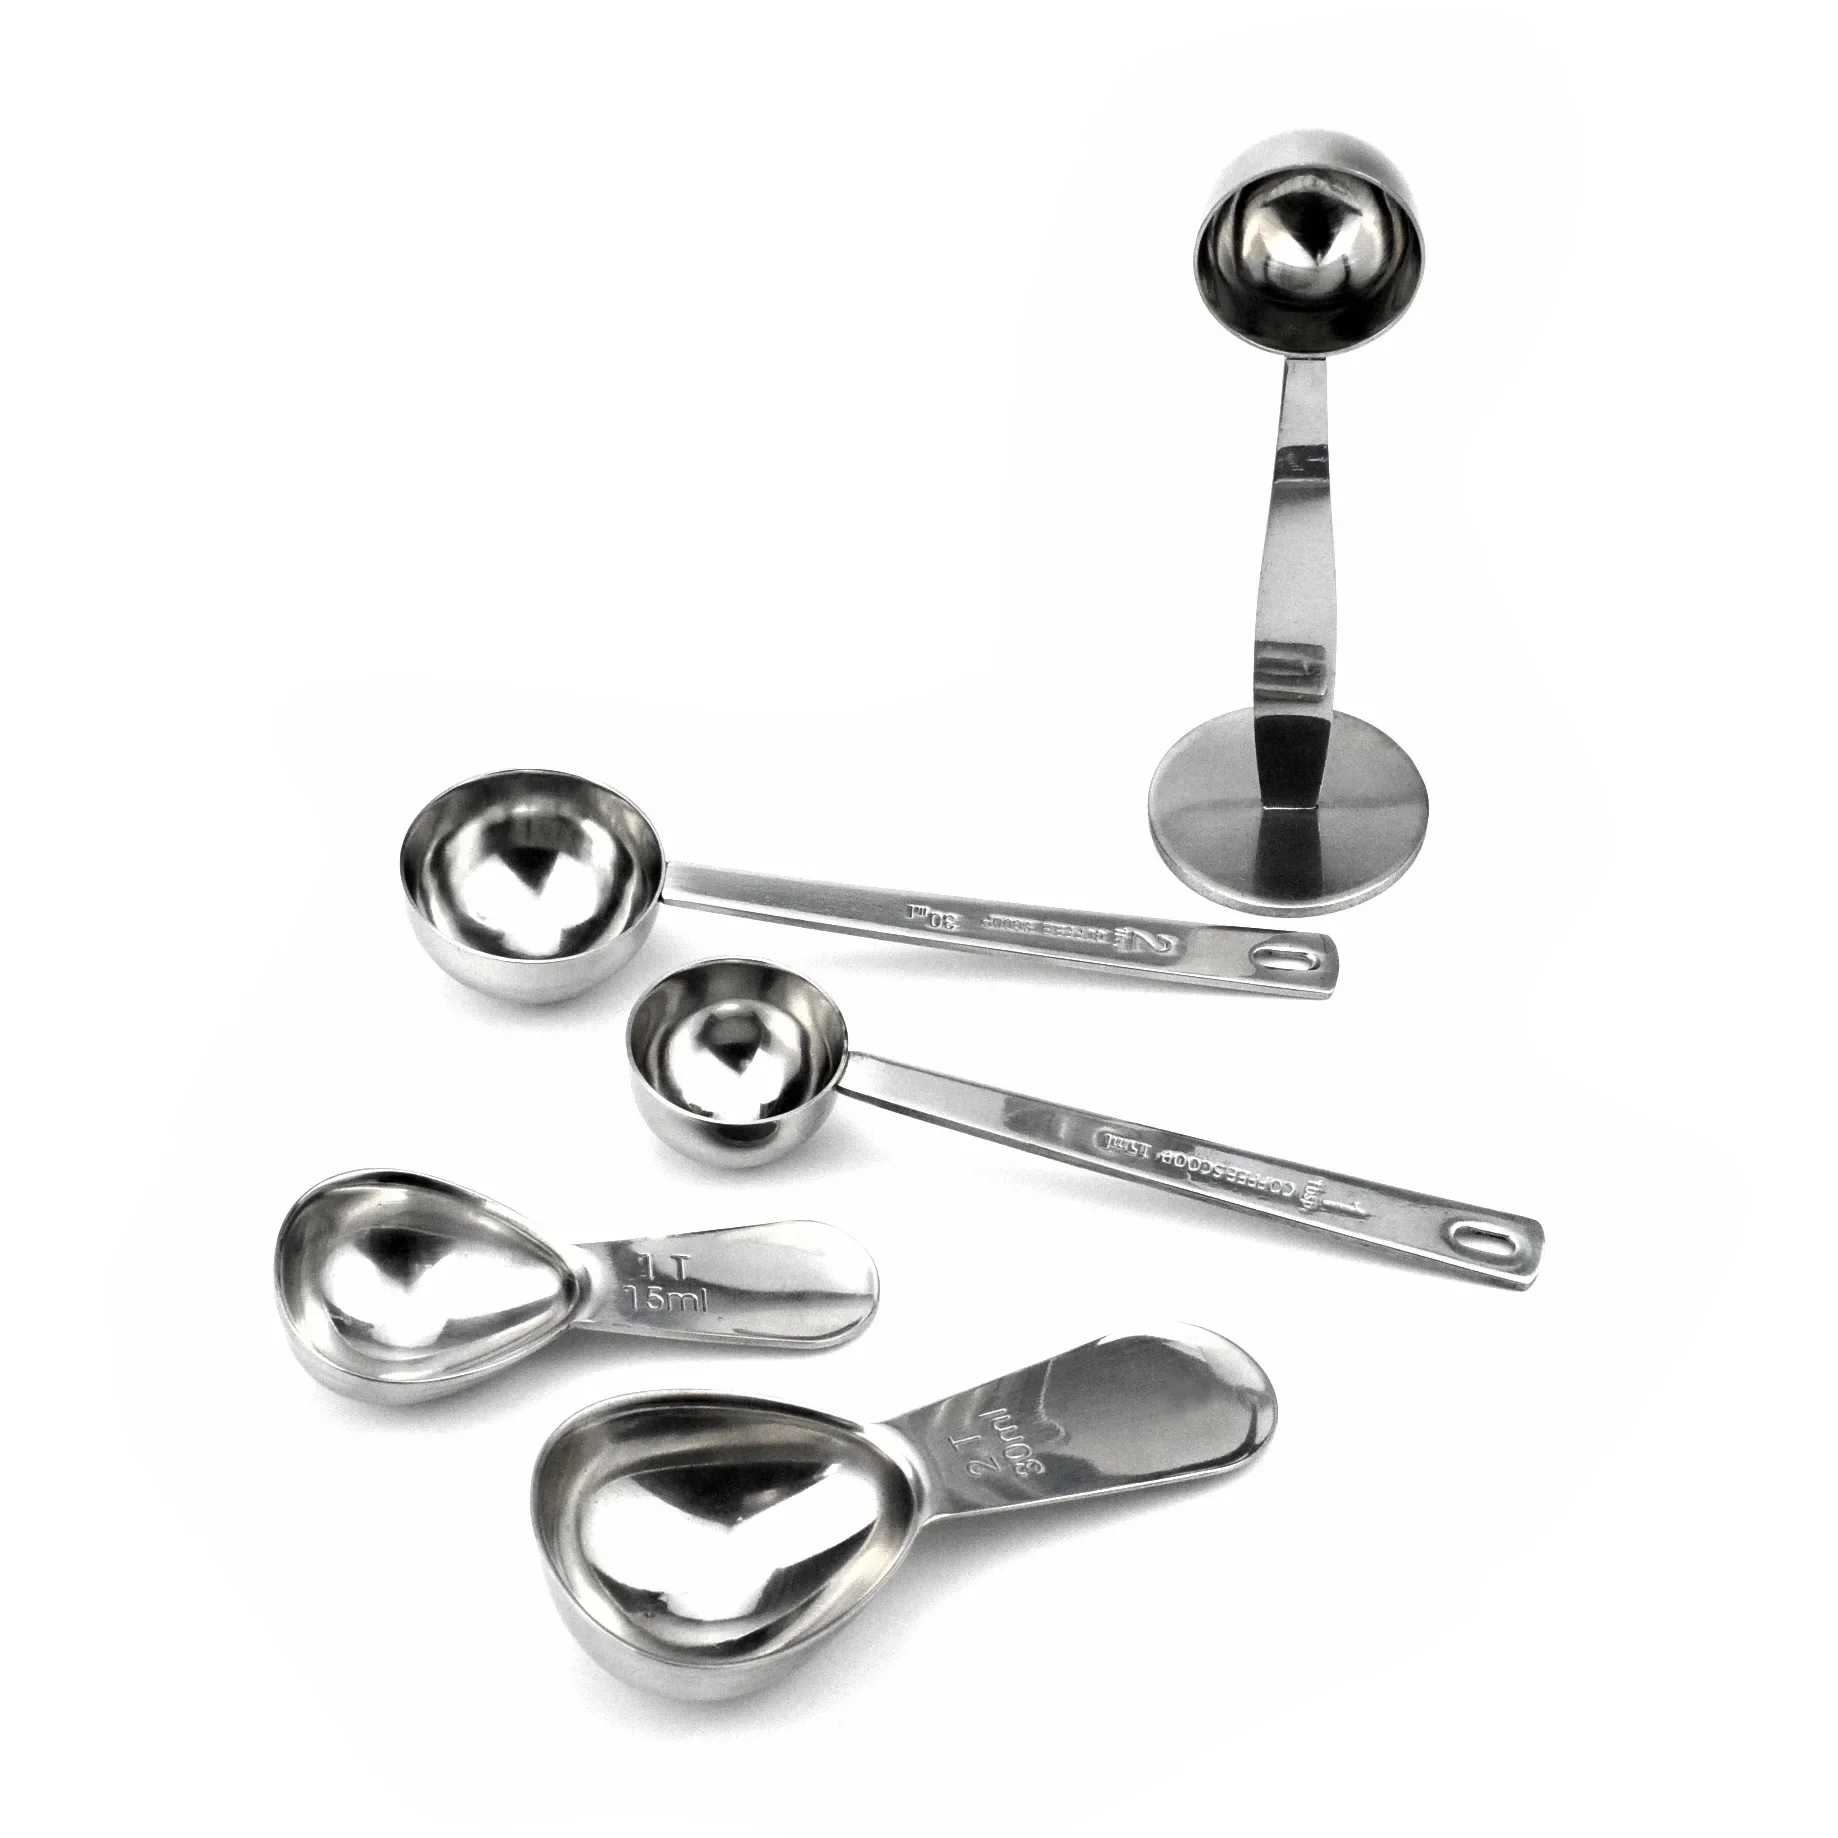 Portable 201 Stainless Steel Stand Coffee Powder Measuring Tamper Spoon Stainless Steel Coffee & Tea Tools images - 6